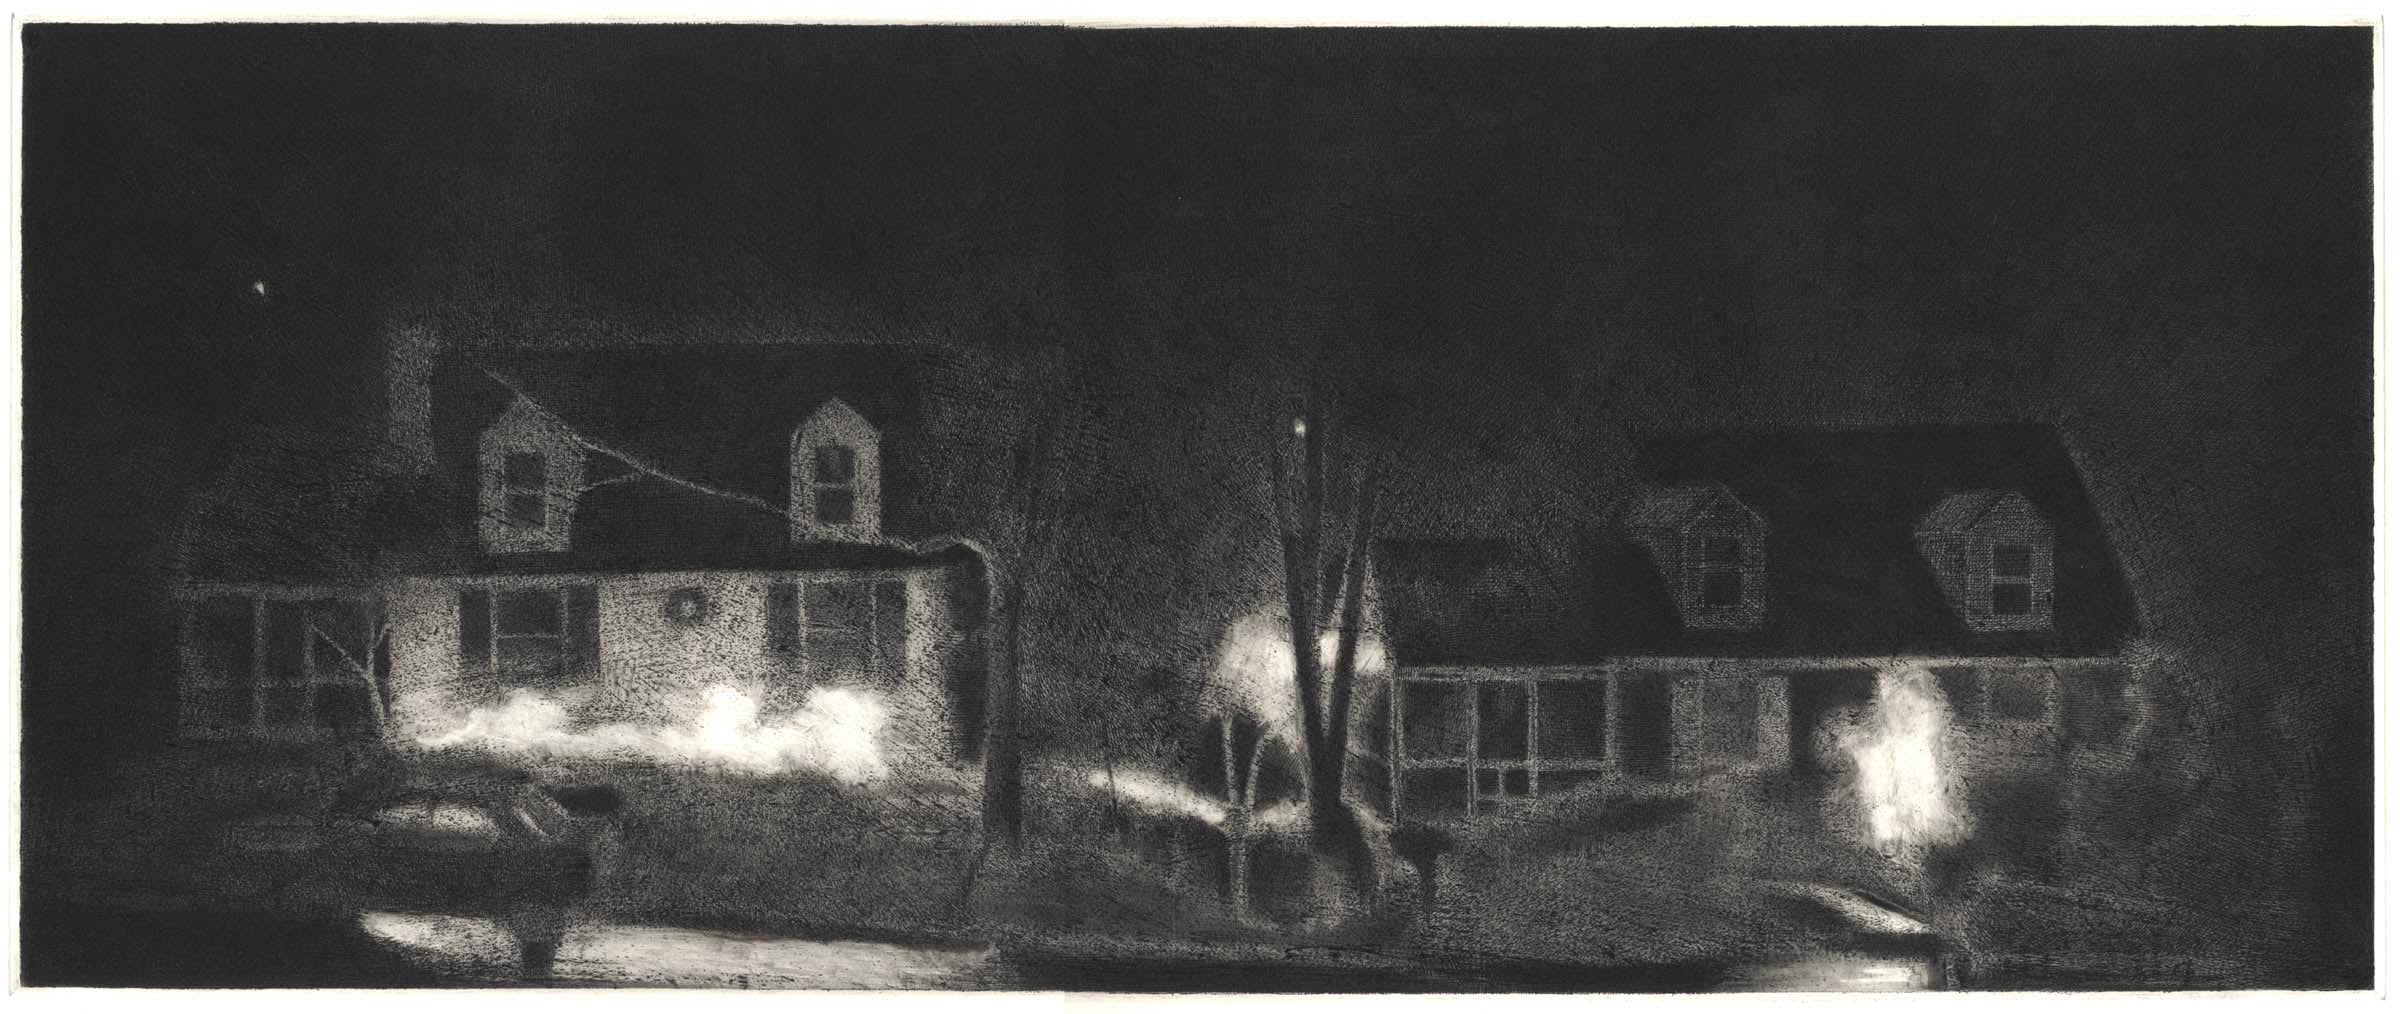 Two Houses: Night image